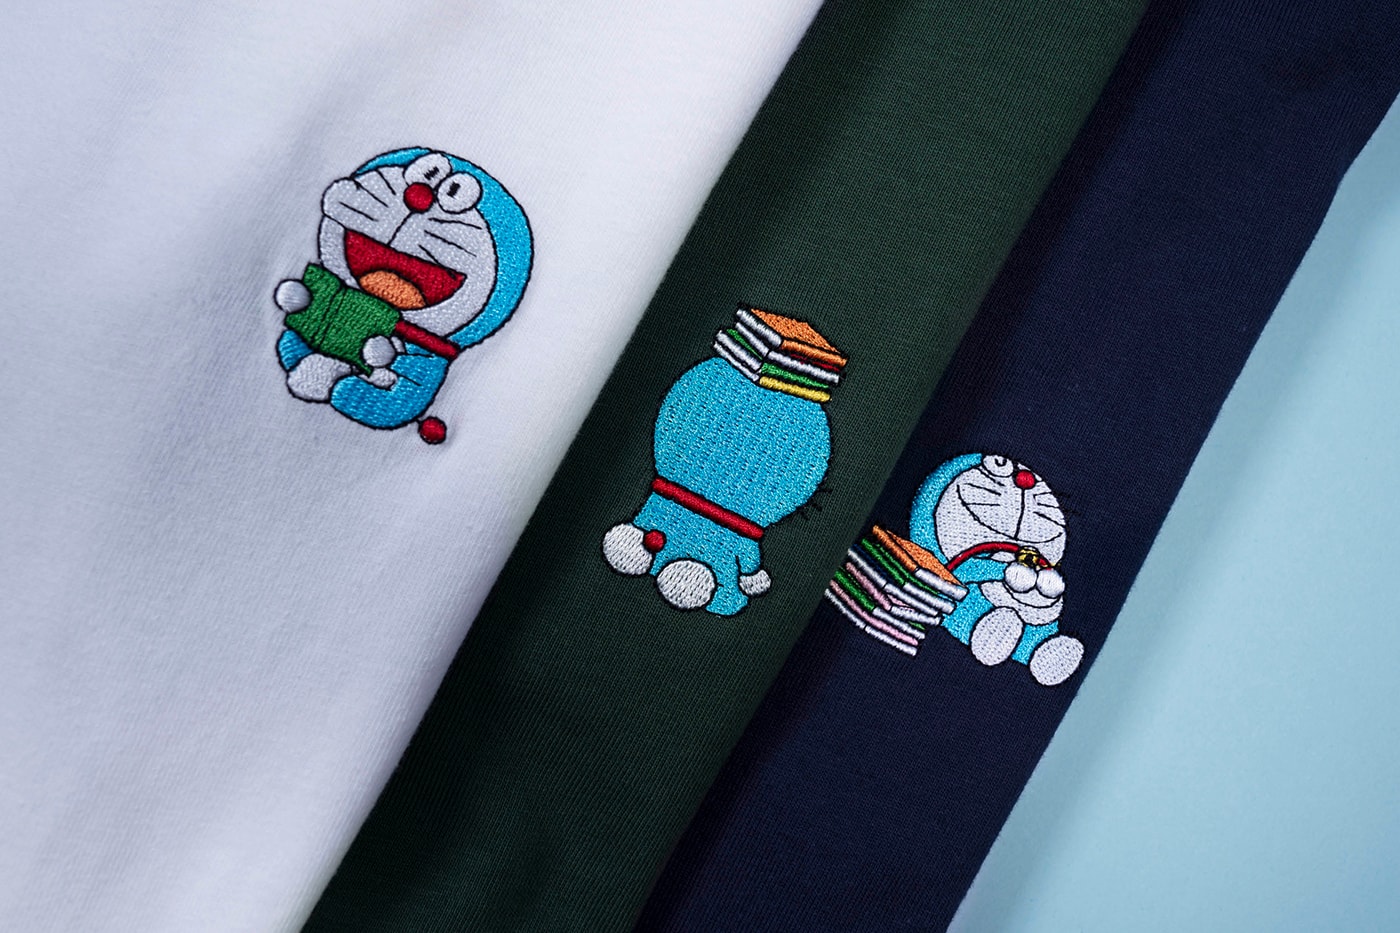 doraemon 50th anniversary allrightsreserved collaboration plush toys dolls home accessories t-shirts keychains